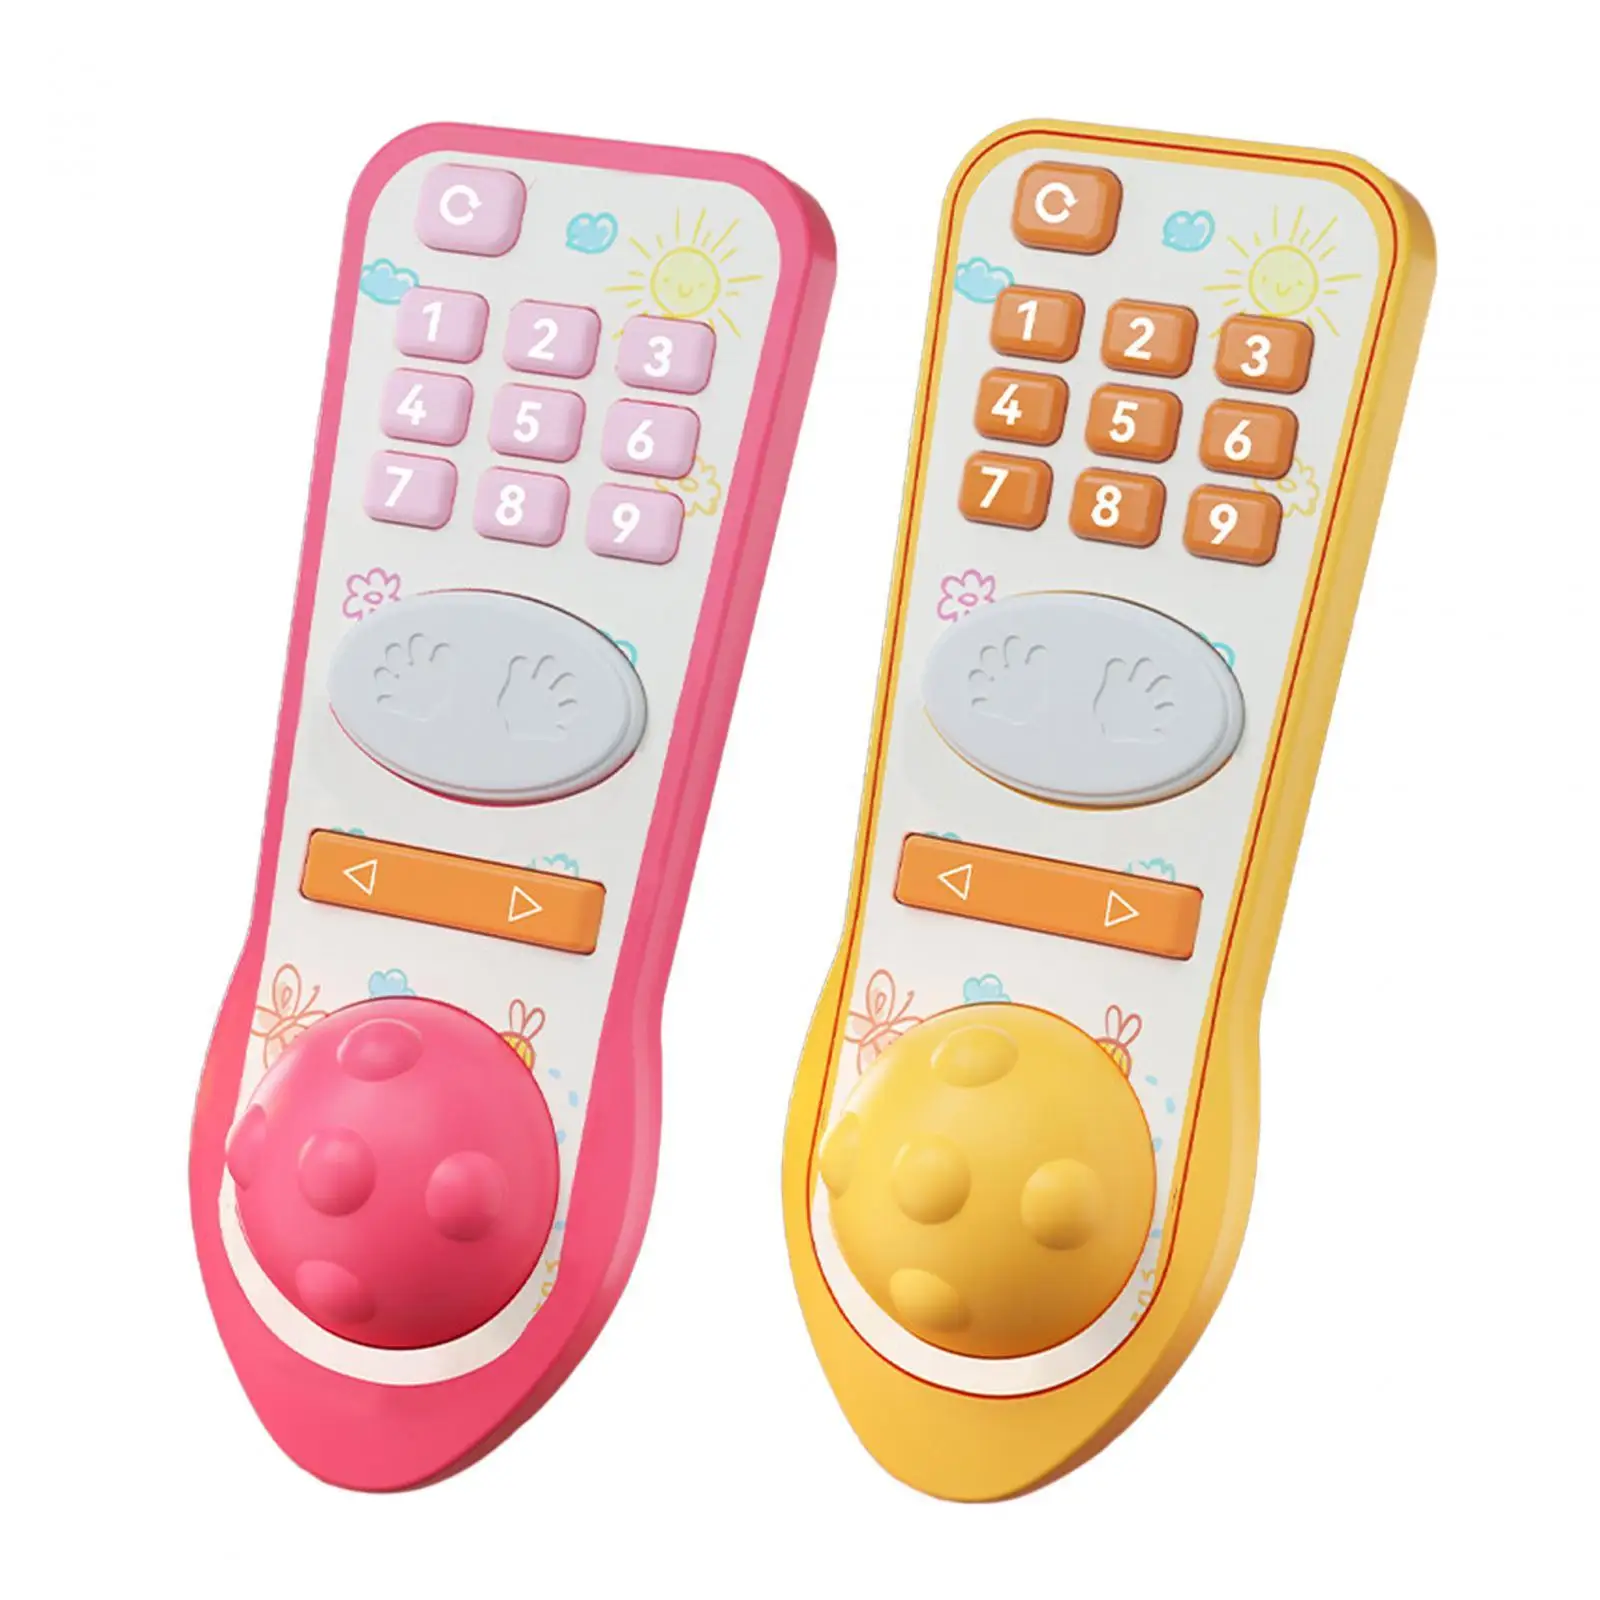 TV Remote Control Toy with Soft Light and Sound Learning Remote Toy for Boys Girls 12 to 18 Months Toddler Baby Birthday Gifts